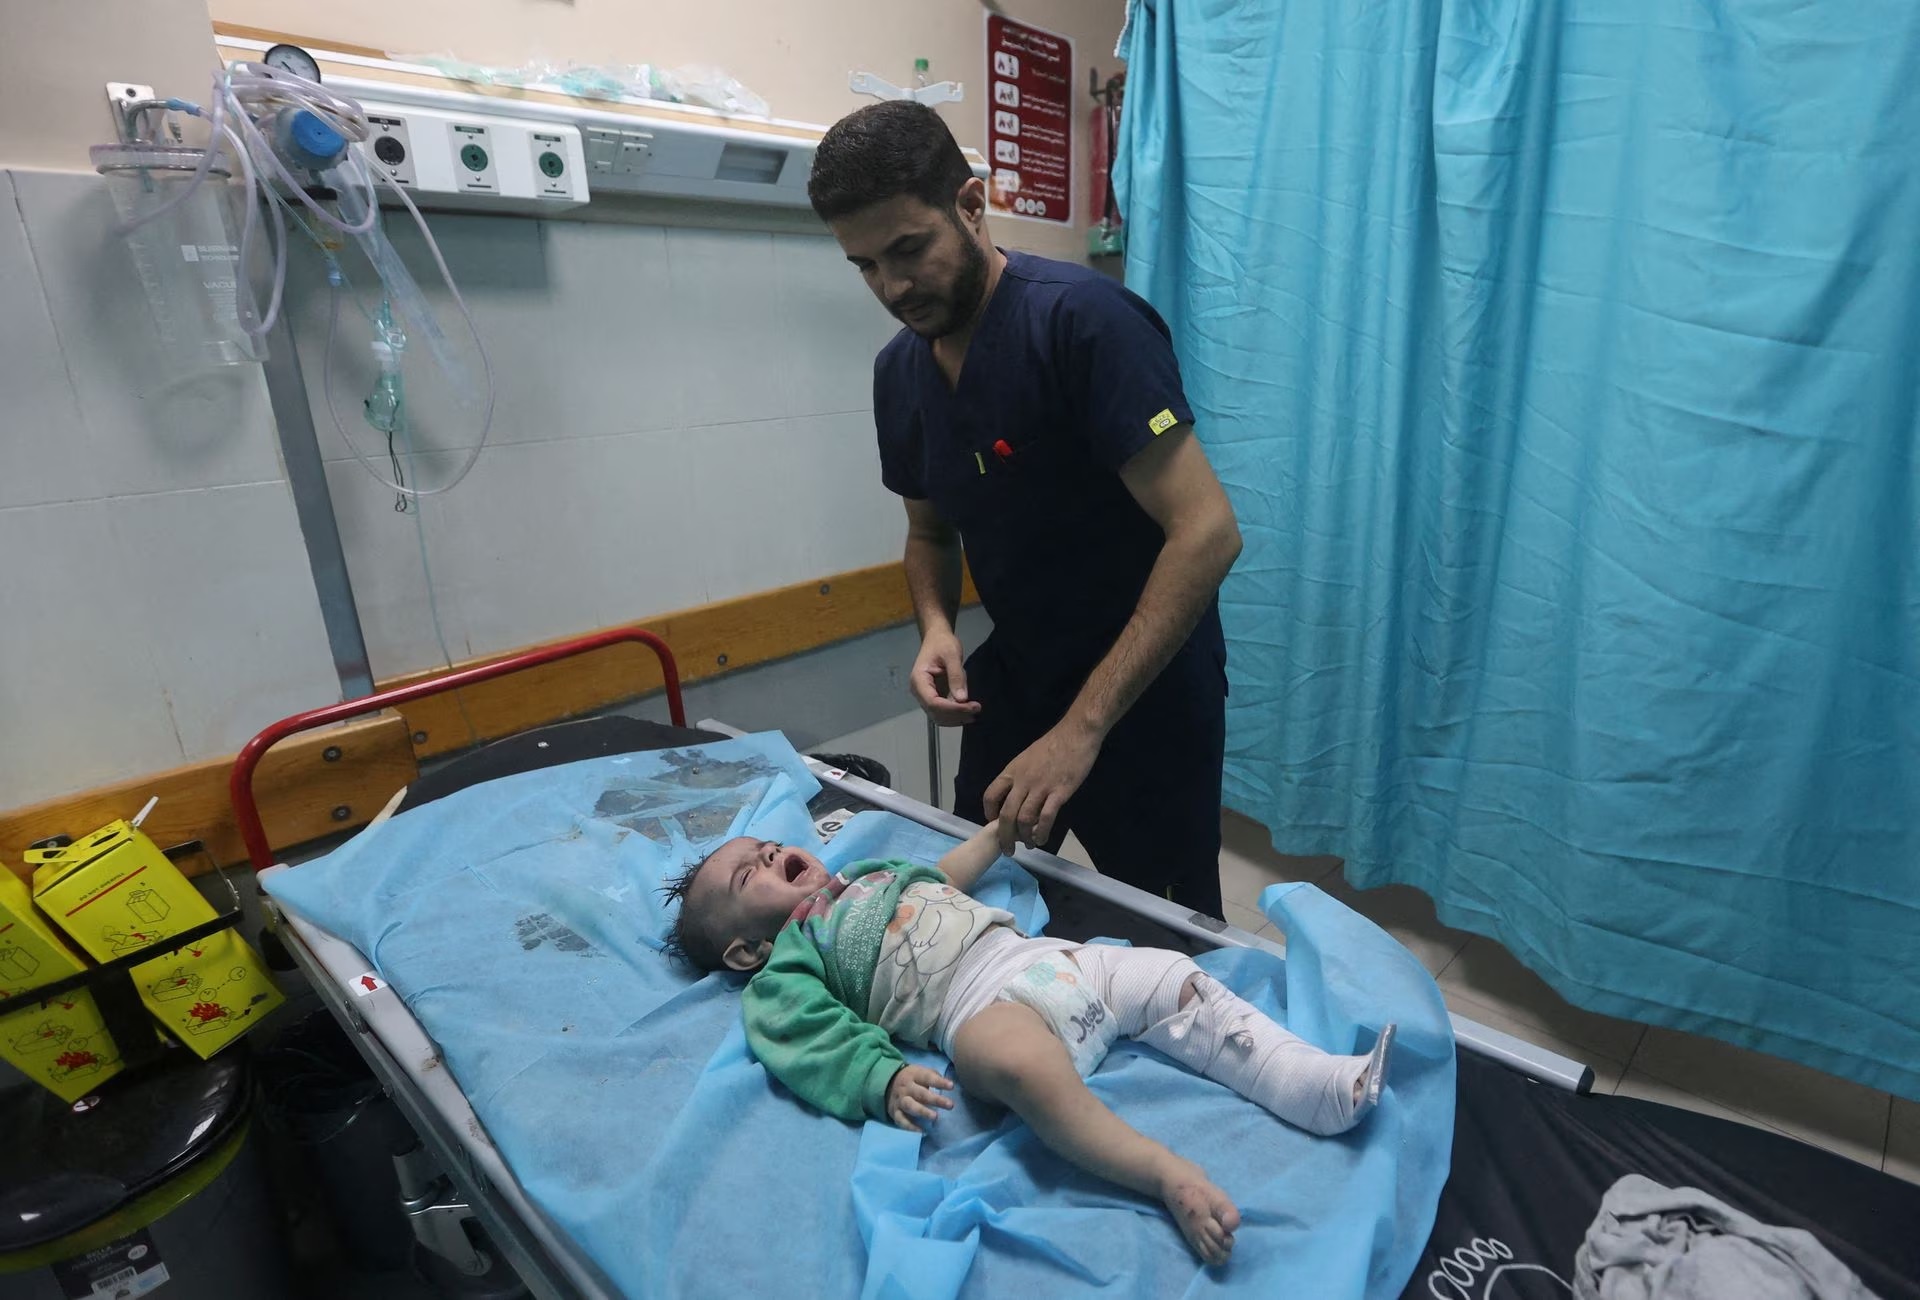 A Palestinian baby, wounded in Israeli strikes, lies on a bed while getting medial attention at a hospital in Khan Younis in the southern Gaza strip.